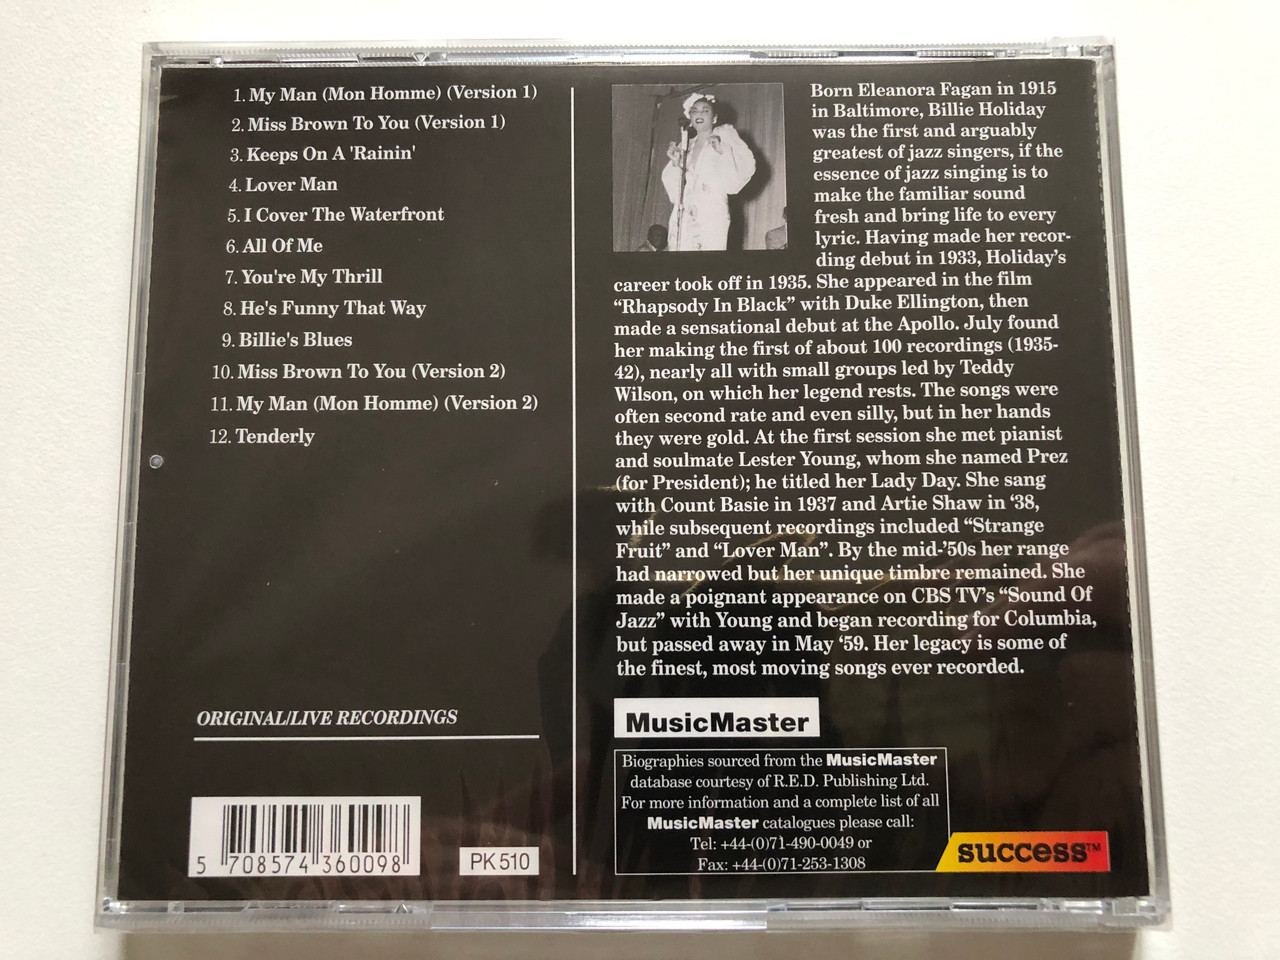 https://cdn10.bigcommerce.com/s-62bdpkt7pb/products/0/images/311274/Billie_Holiday_My_Man_Biographical_details_on_the_back_Success_Audio_CD_16009CD_2__81029.1699547633.1280.1280.JPG?c=2